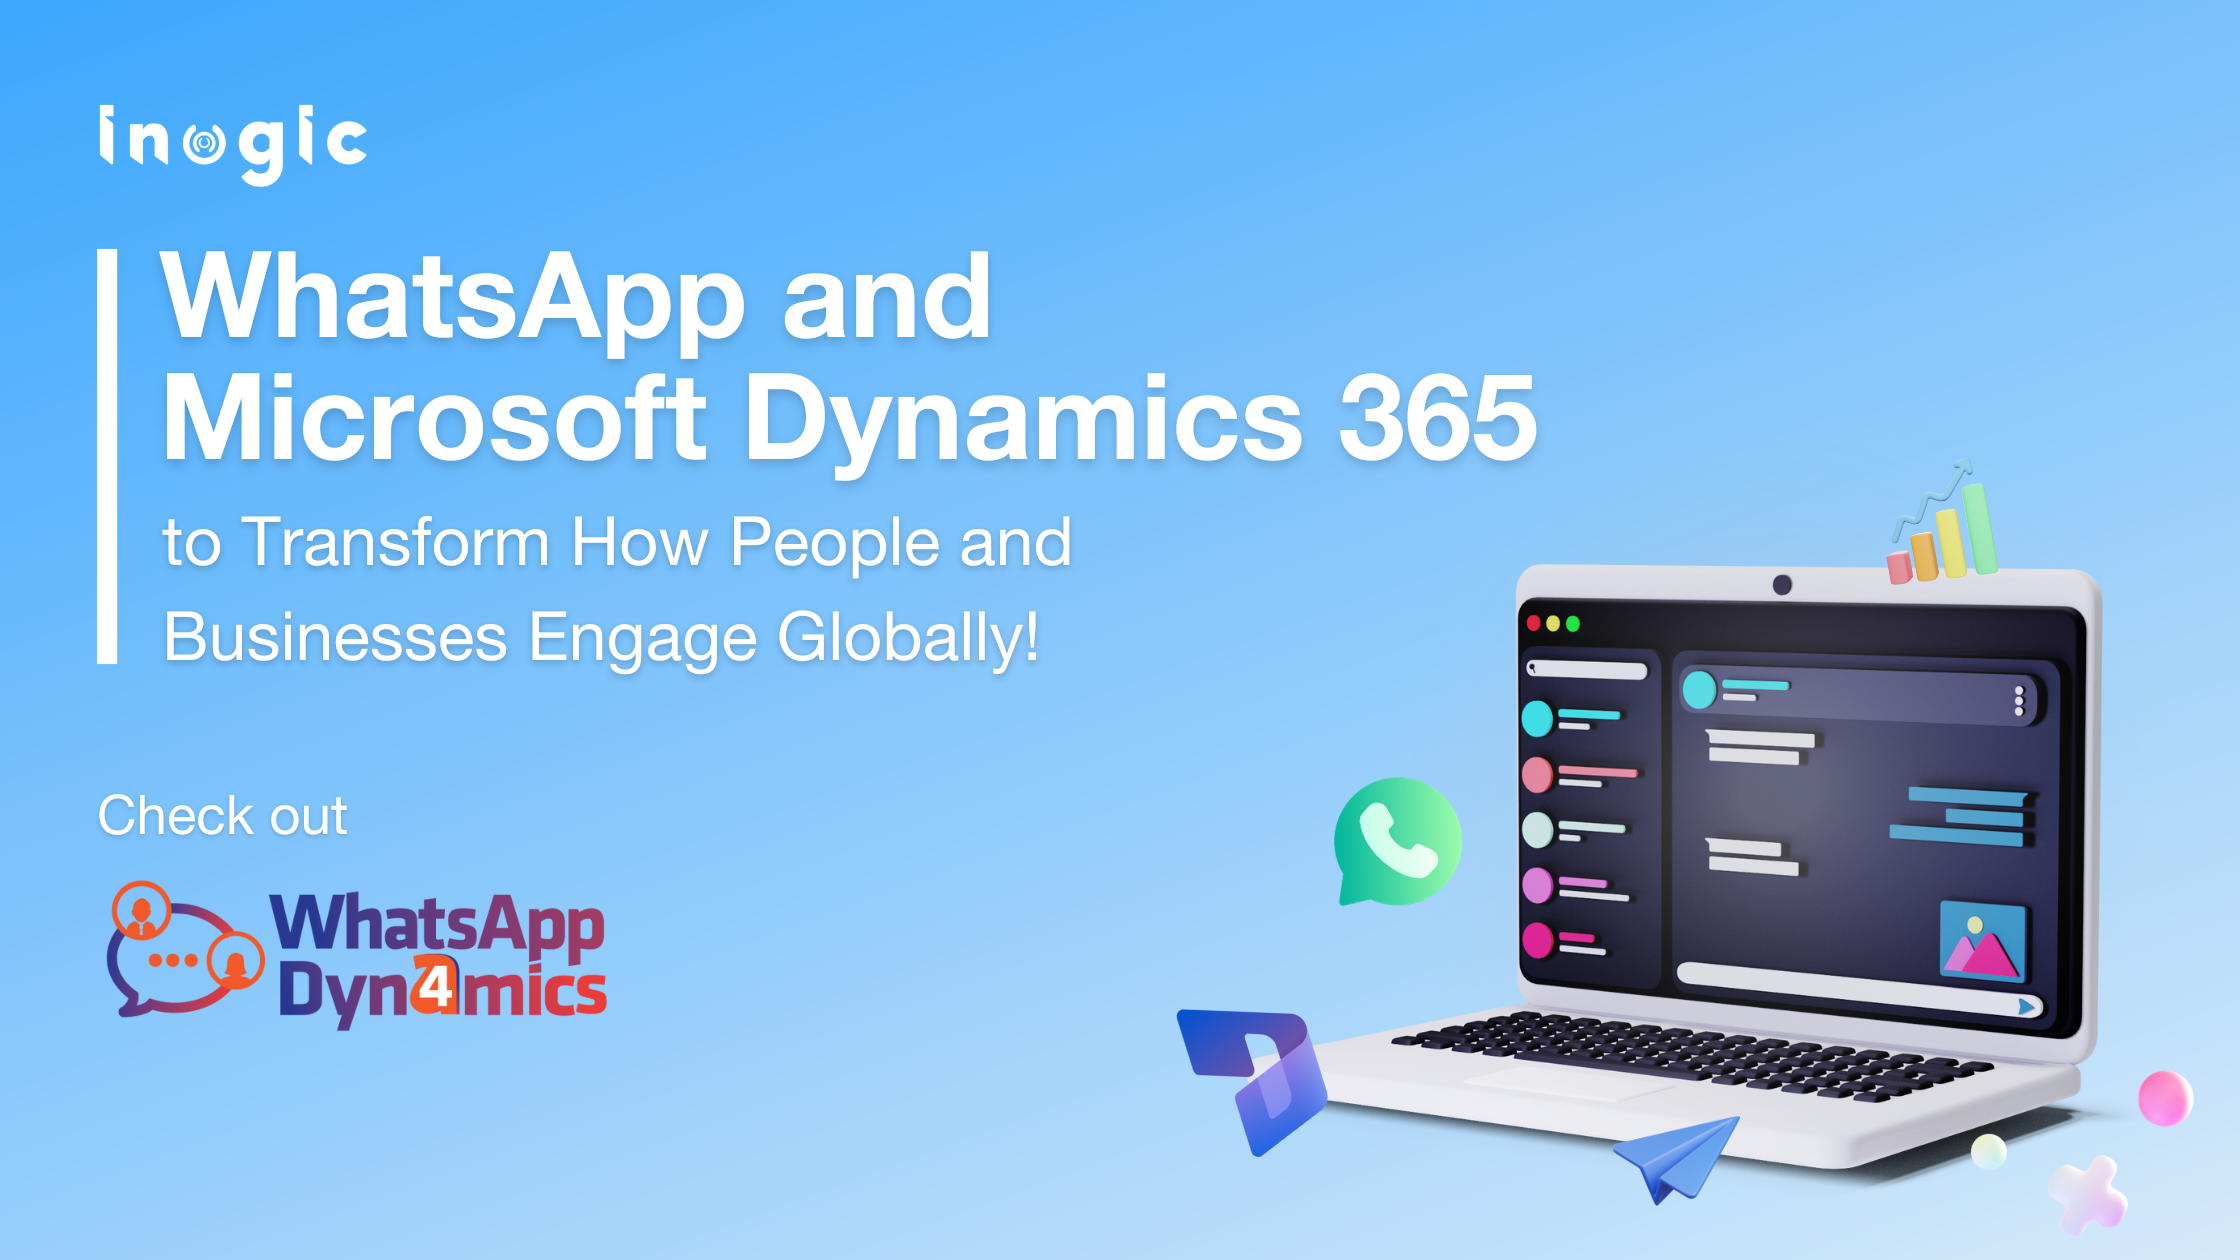 WhatsApp and Microsoft Dynamics 365 to Transform How People and Businesses Engage Globally!